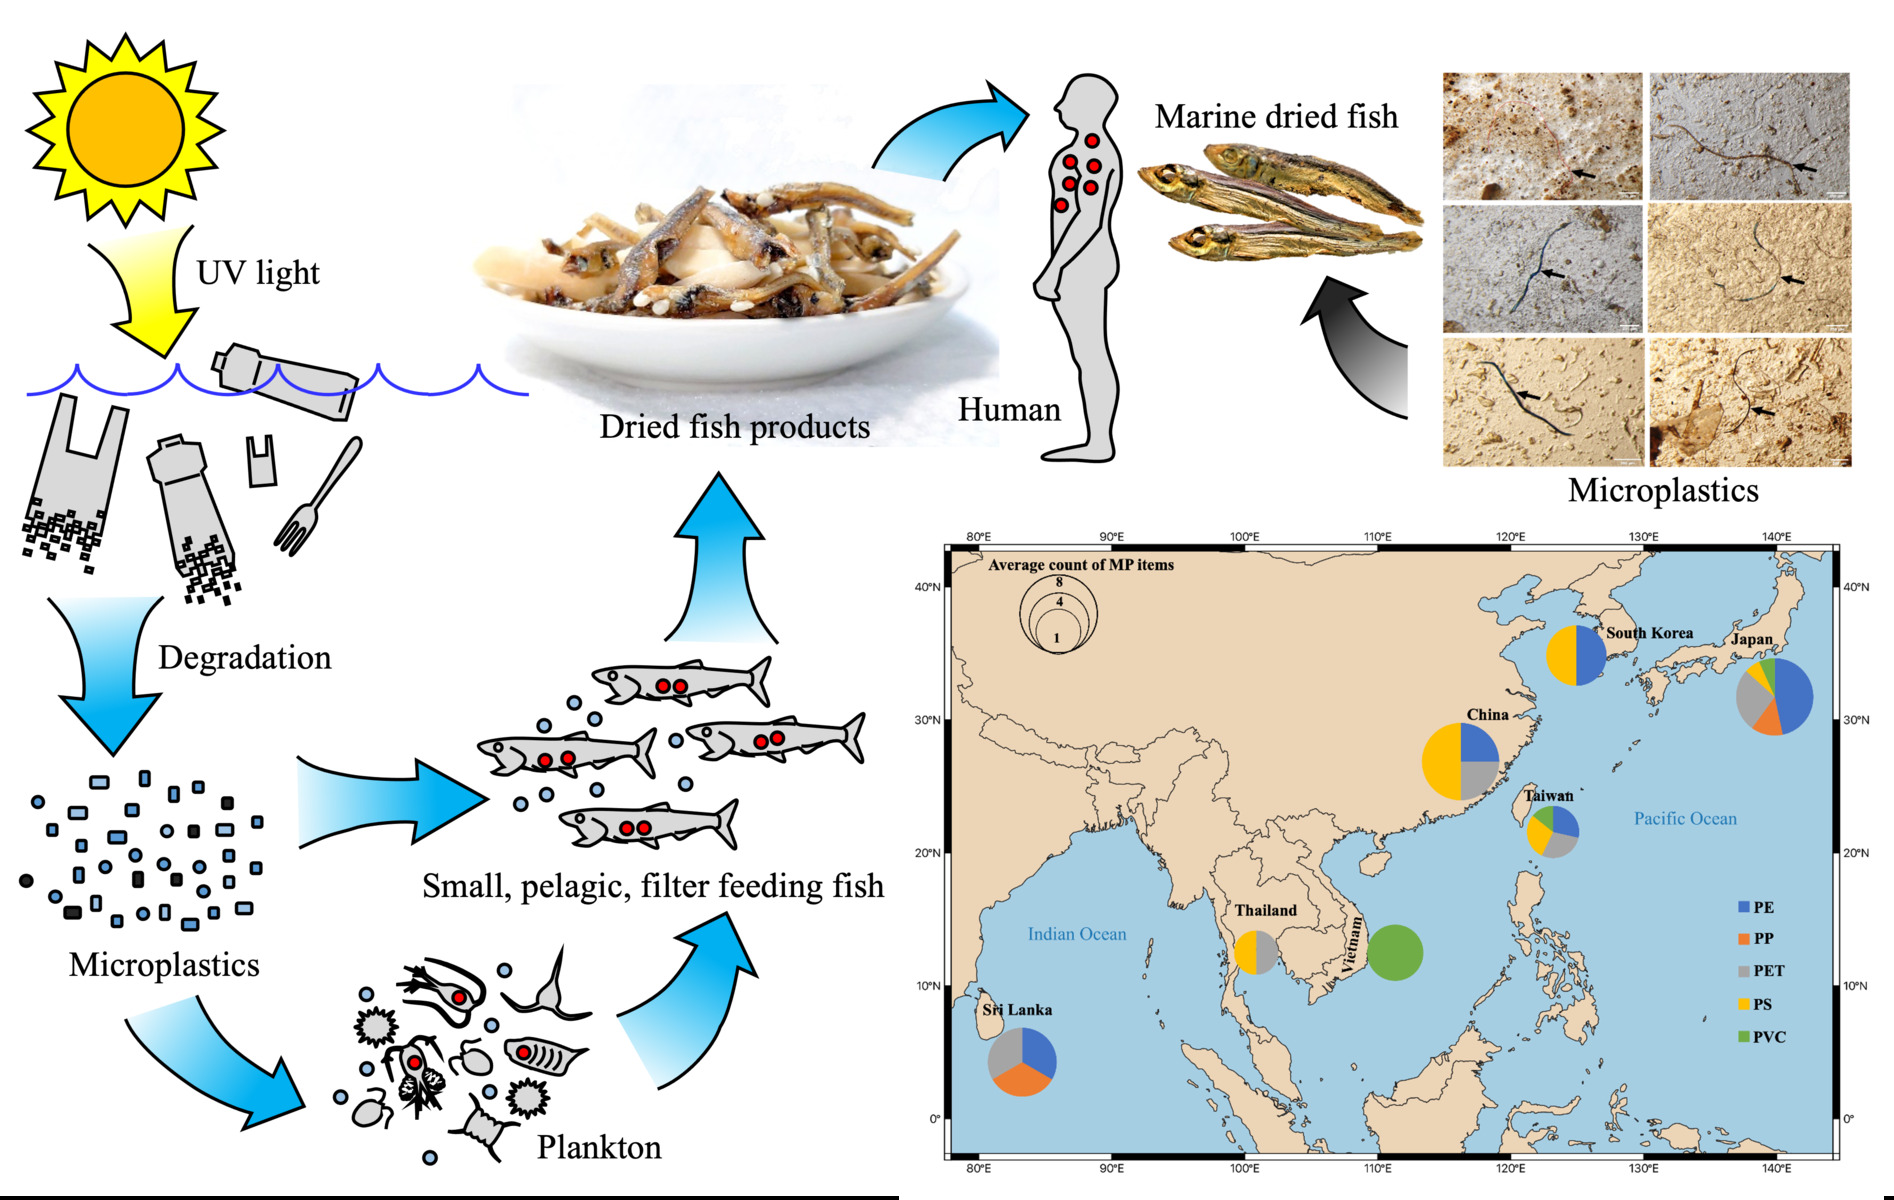 Plastic products decompose and generate particles of microplastics, ingested by marine organisms, and enter human bodies through the food chain. The potential threat to human health caused by microplastics should be assessed by further studies.